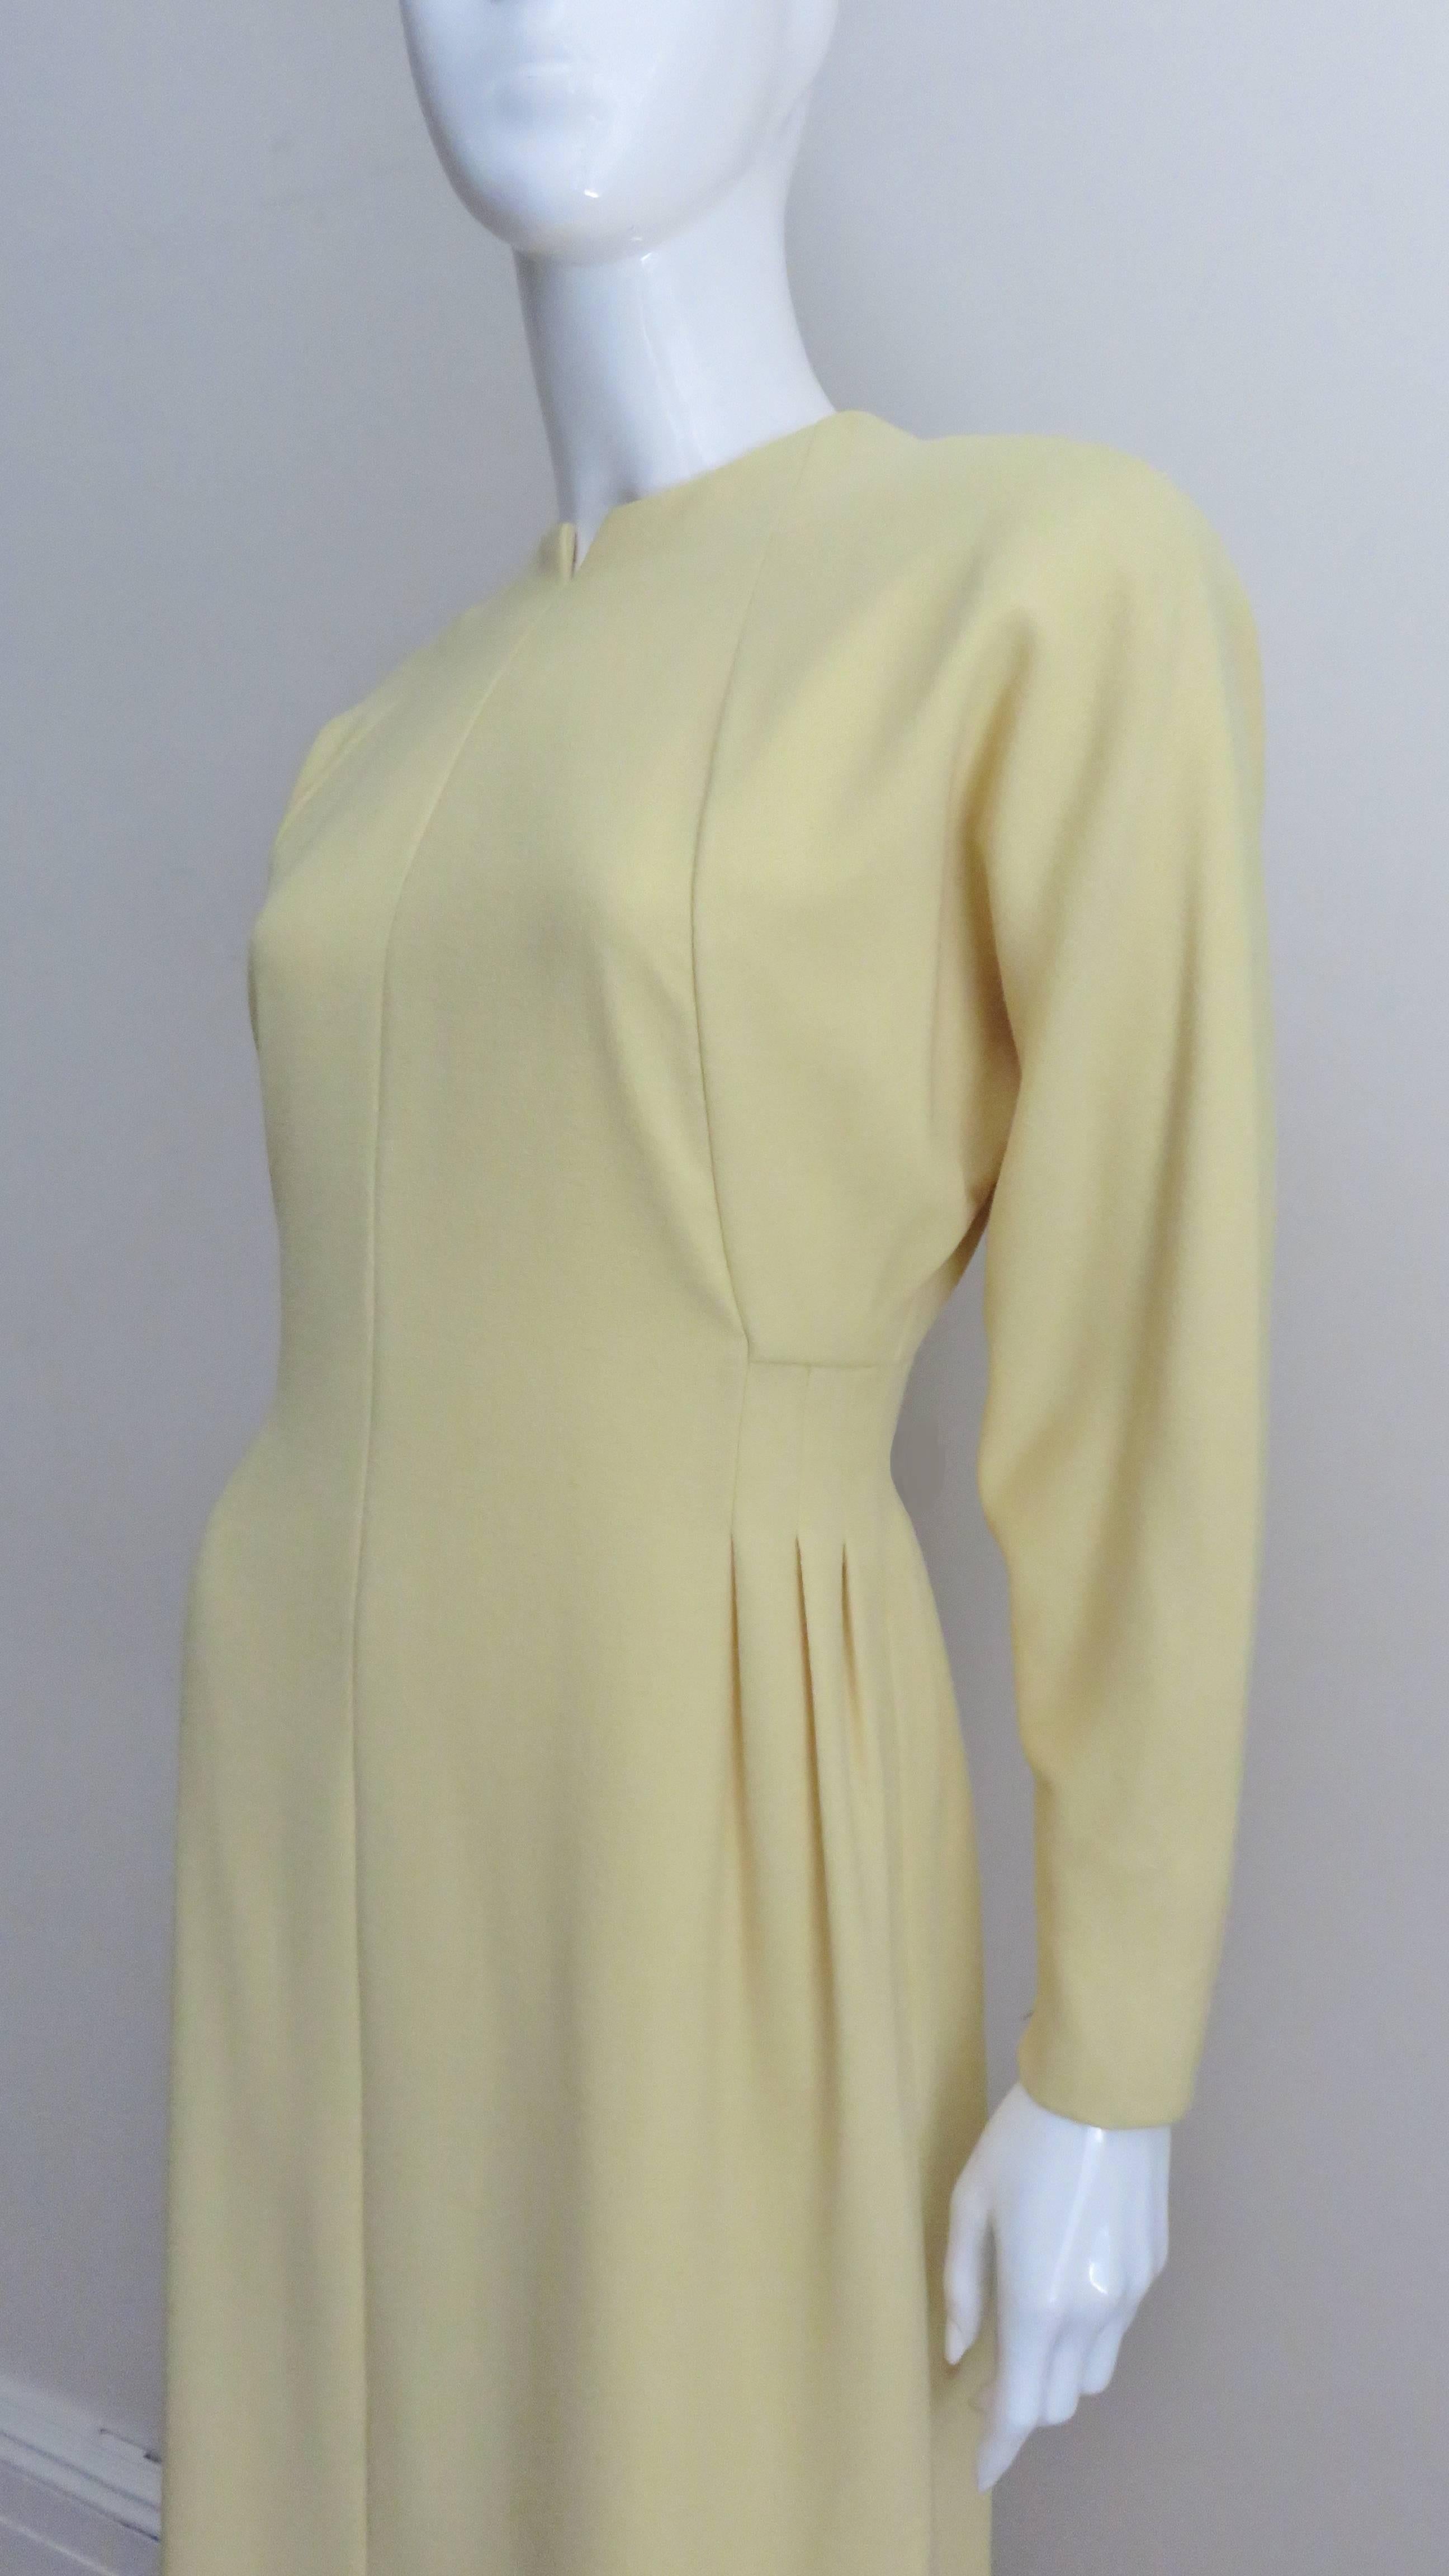 Beige 1970s Pauline Trigere Dress with Seaming